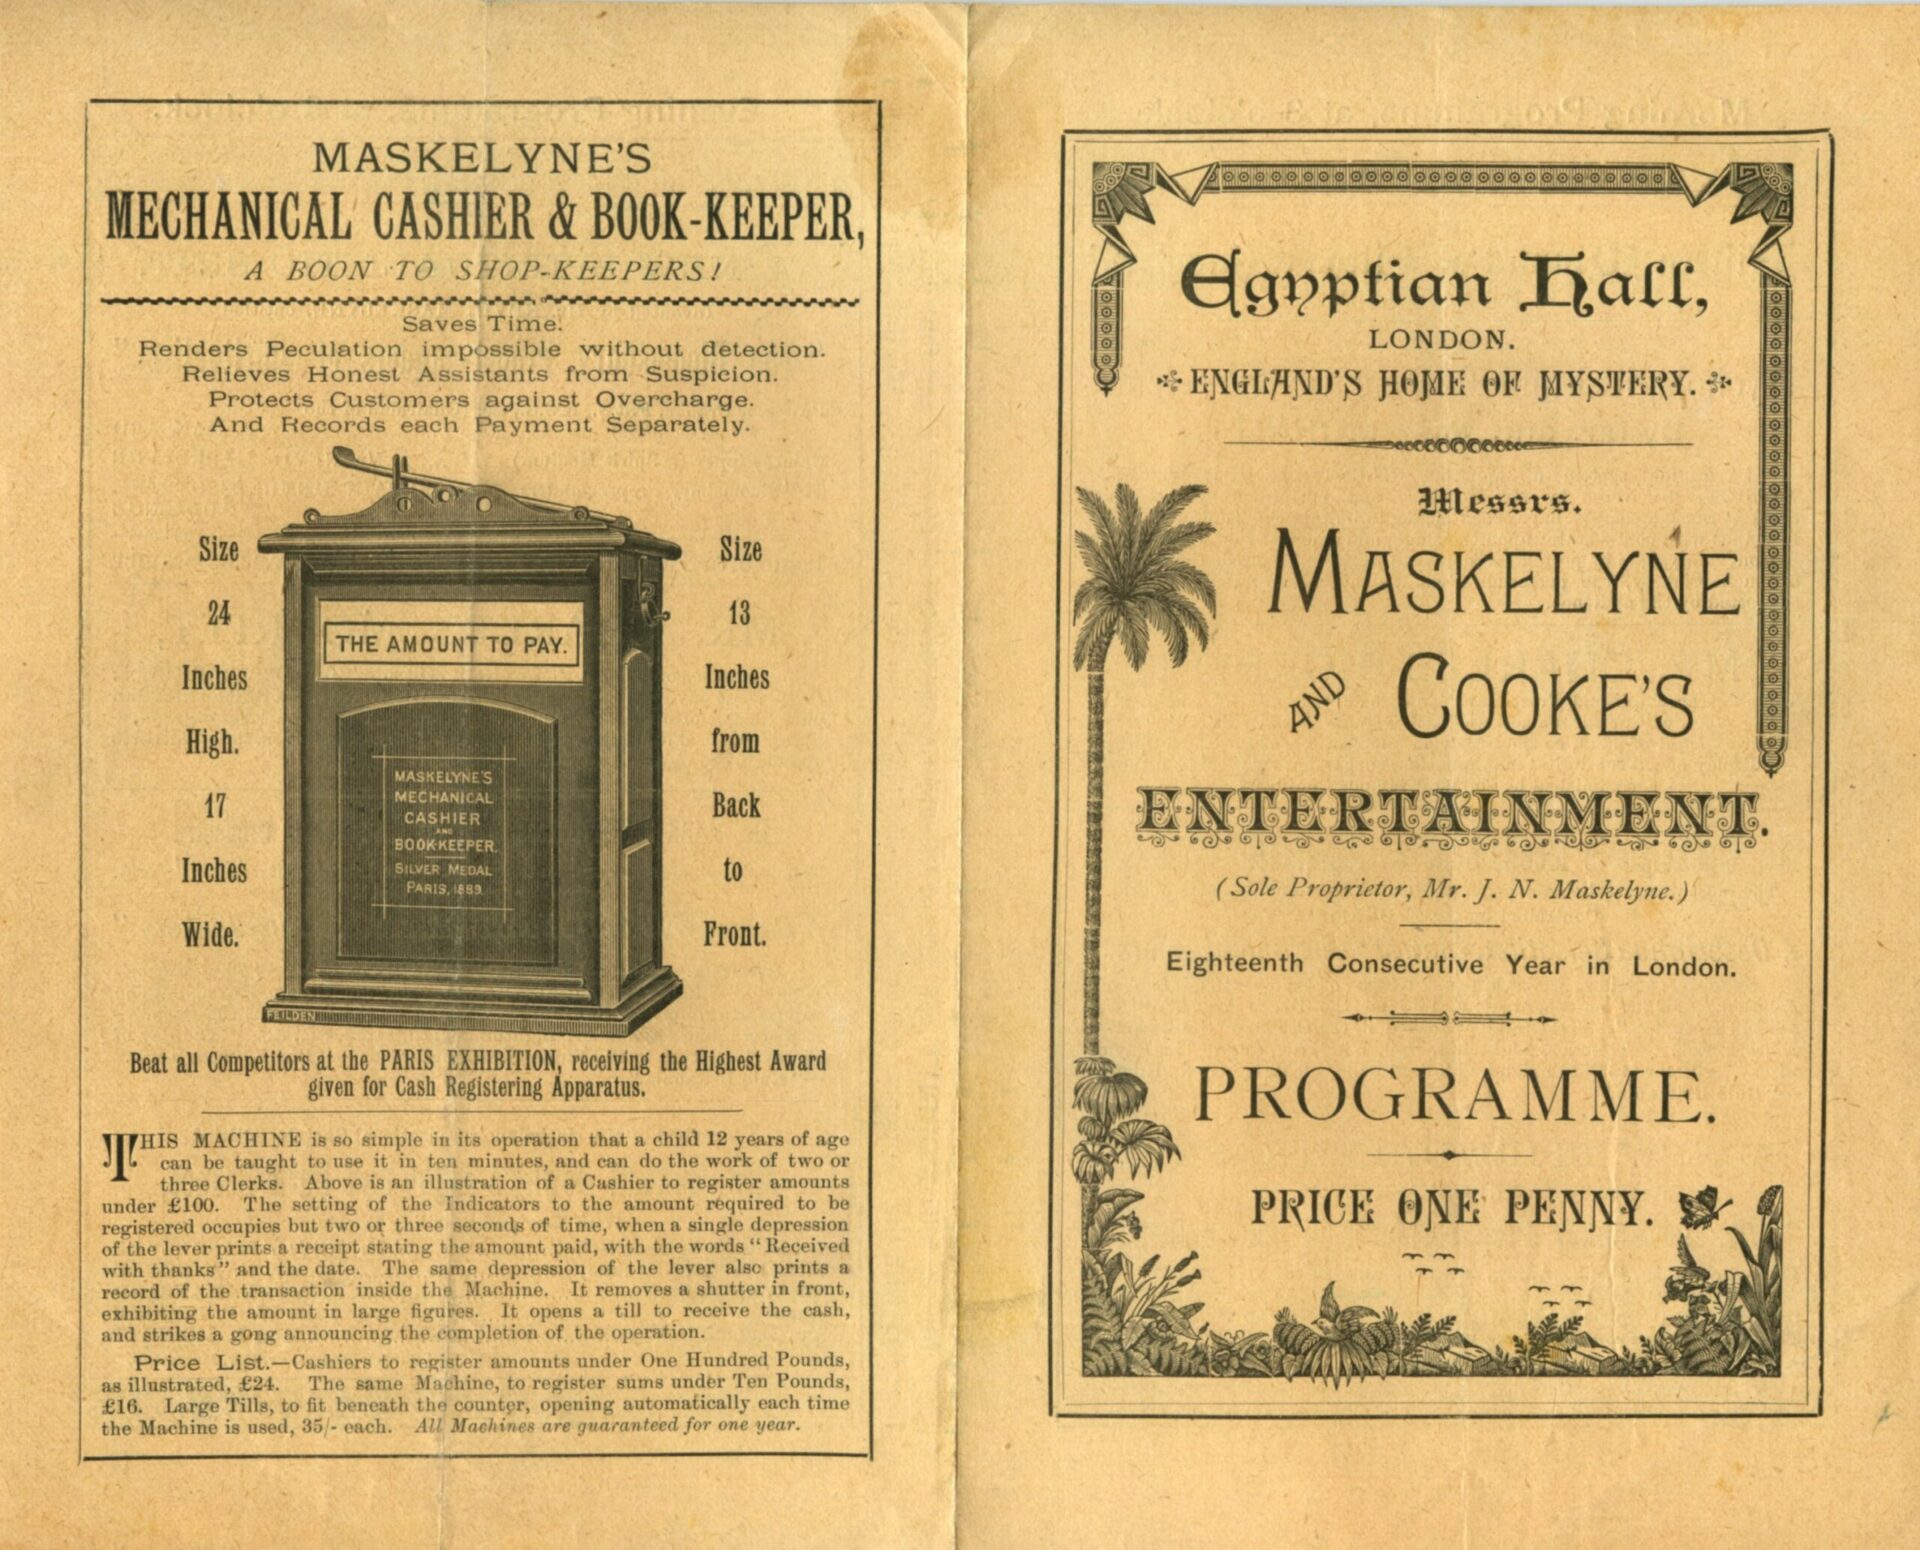 Maskelyne and Cooke programme for the Egyptian Hall, 18th consecutive year